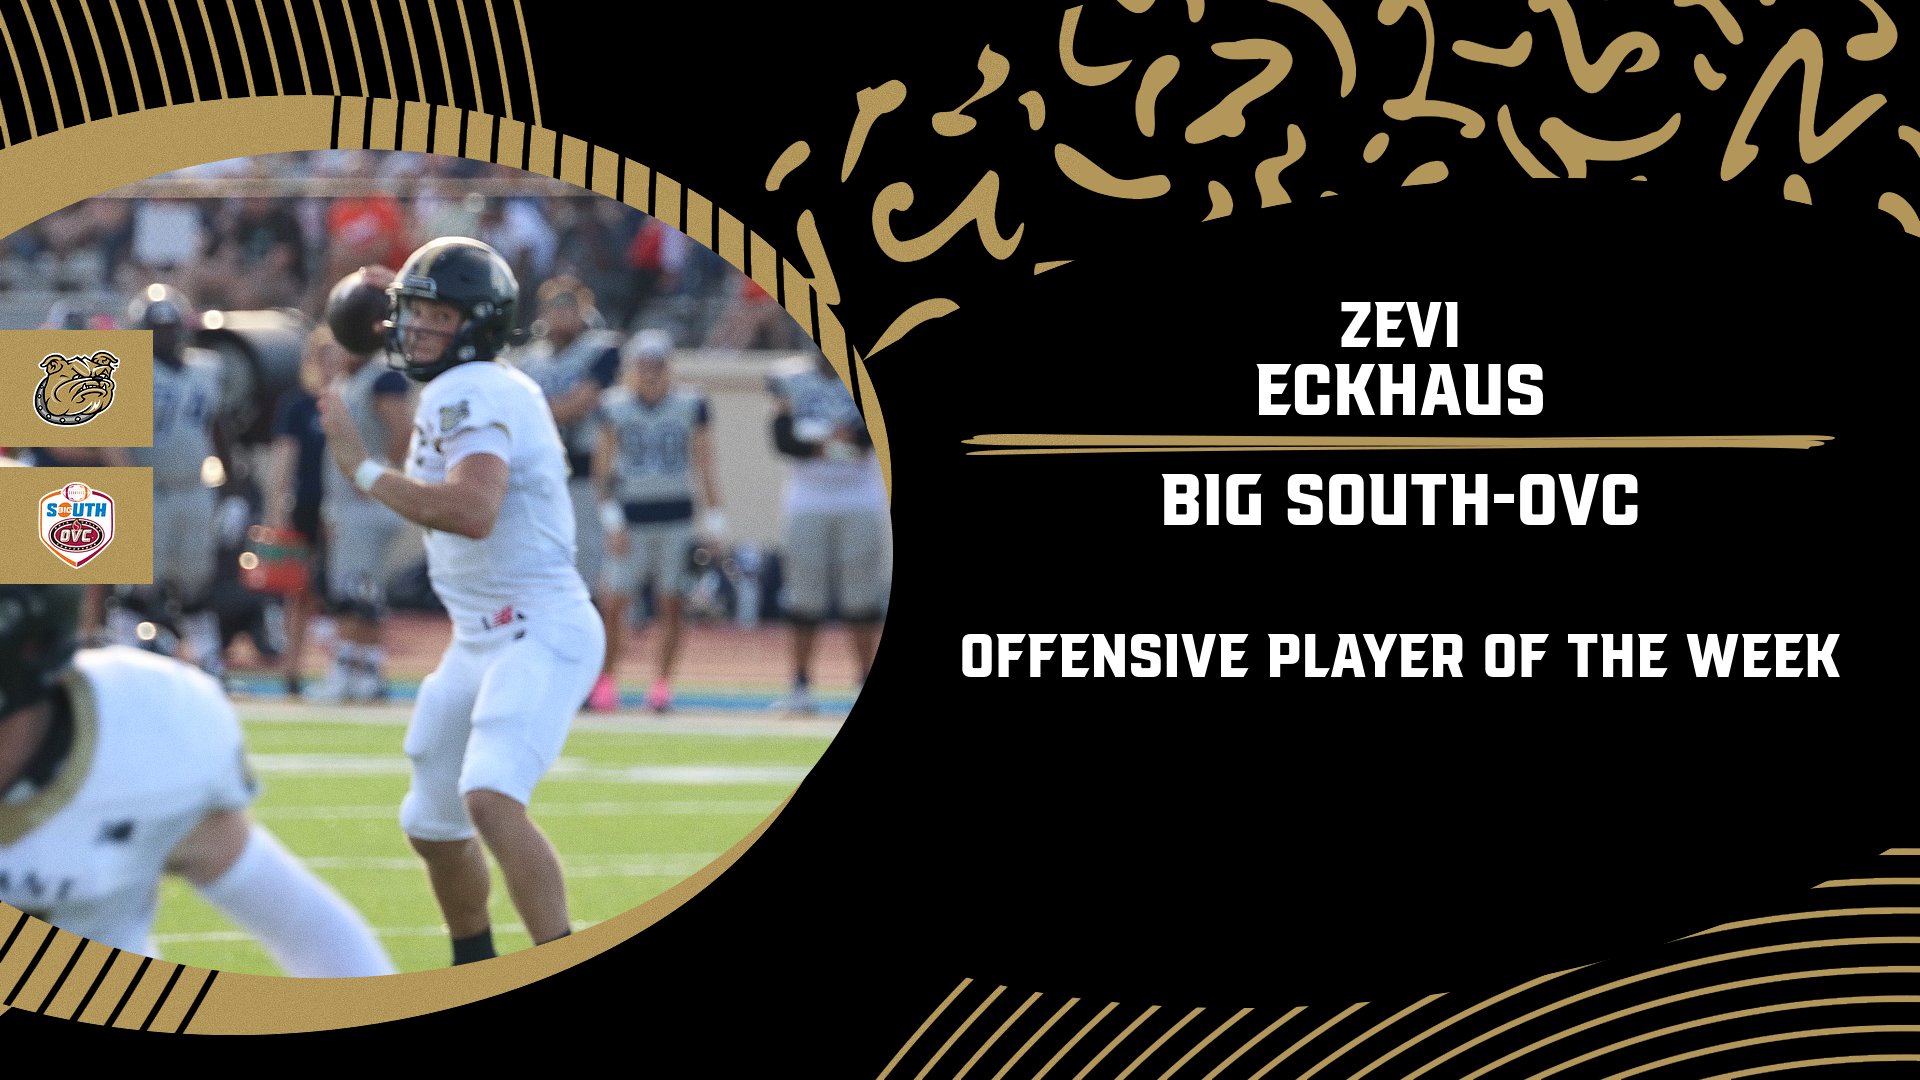 Eckhaus named Big South-OVC Offensive Player of the Week